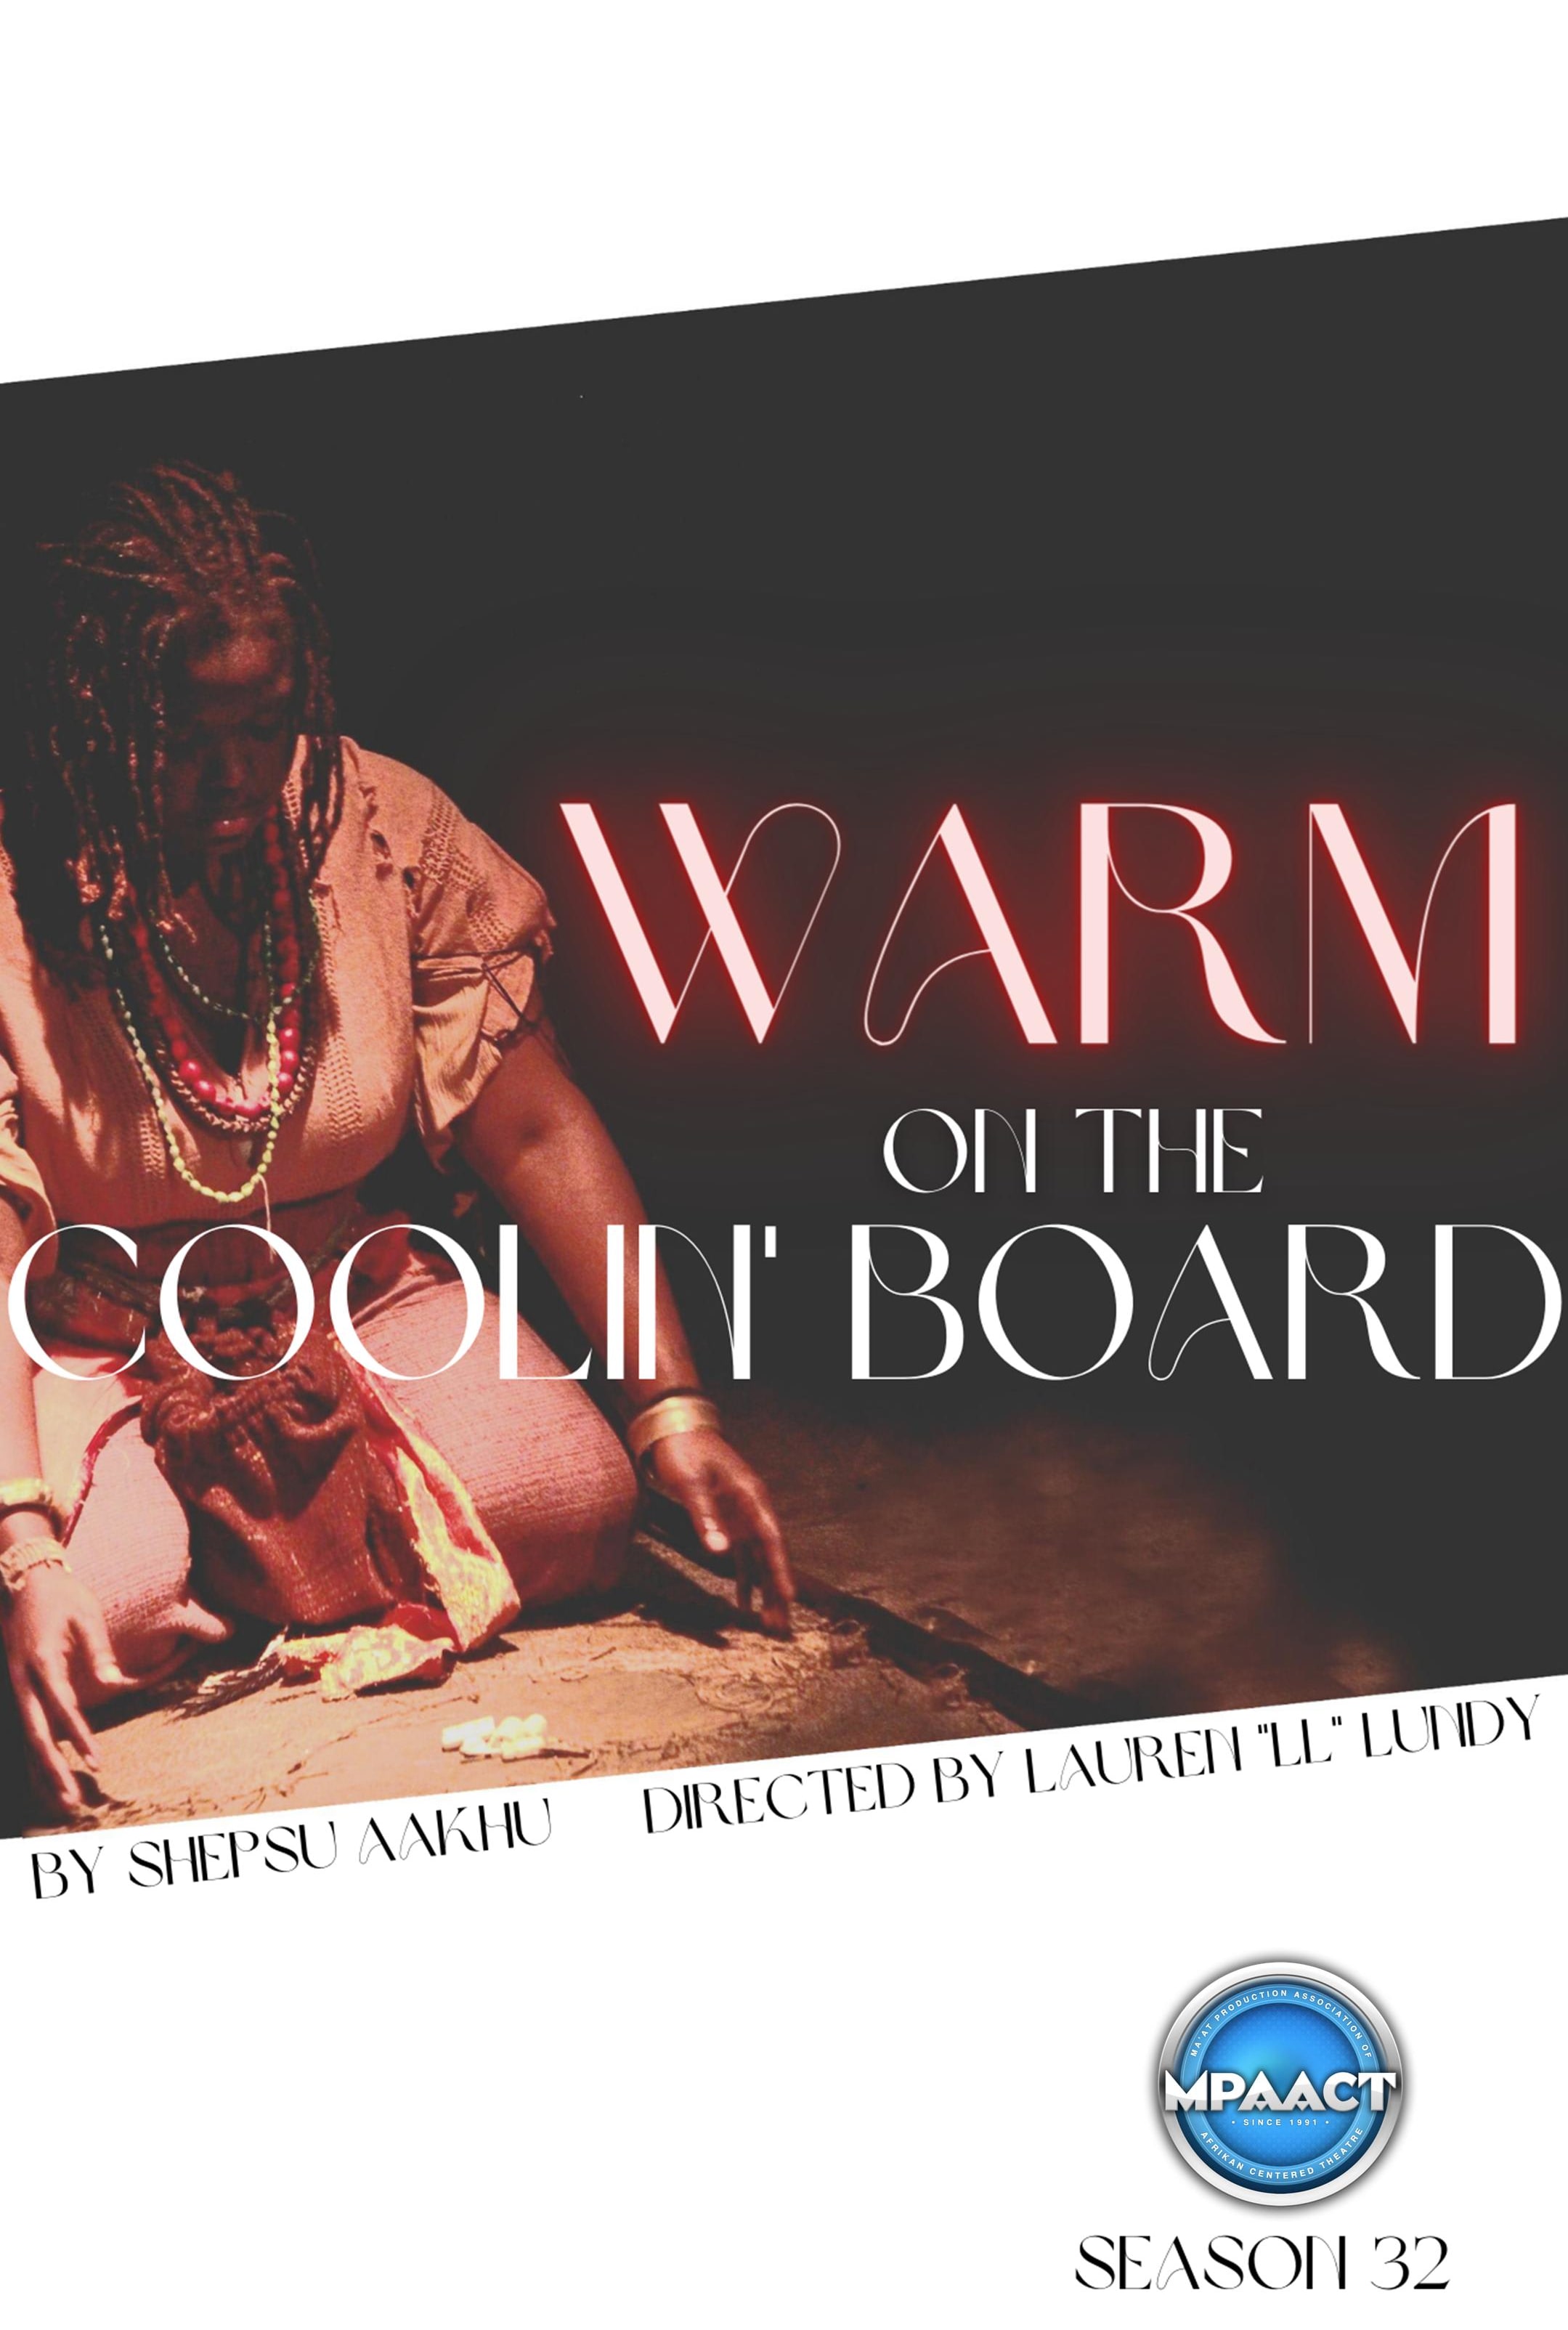 Warm on the Coolin' Board